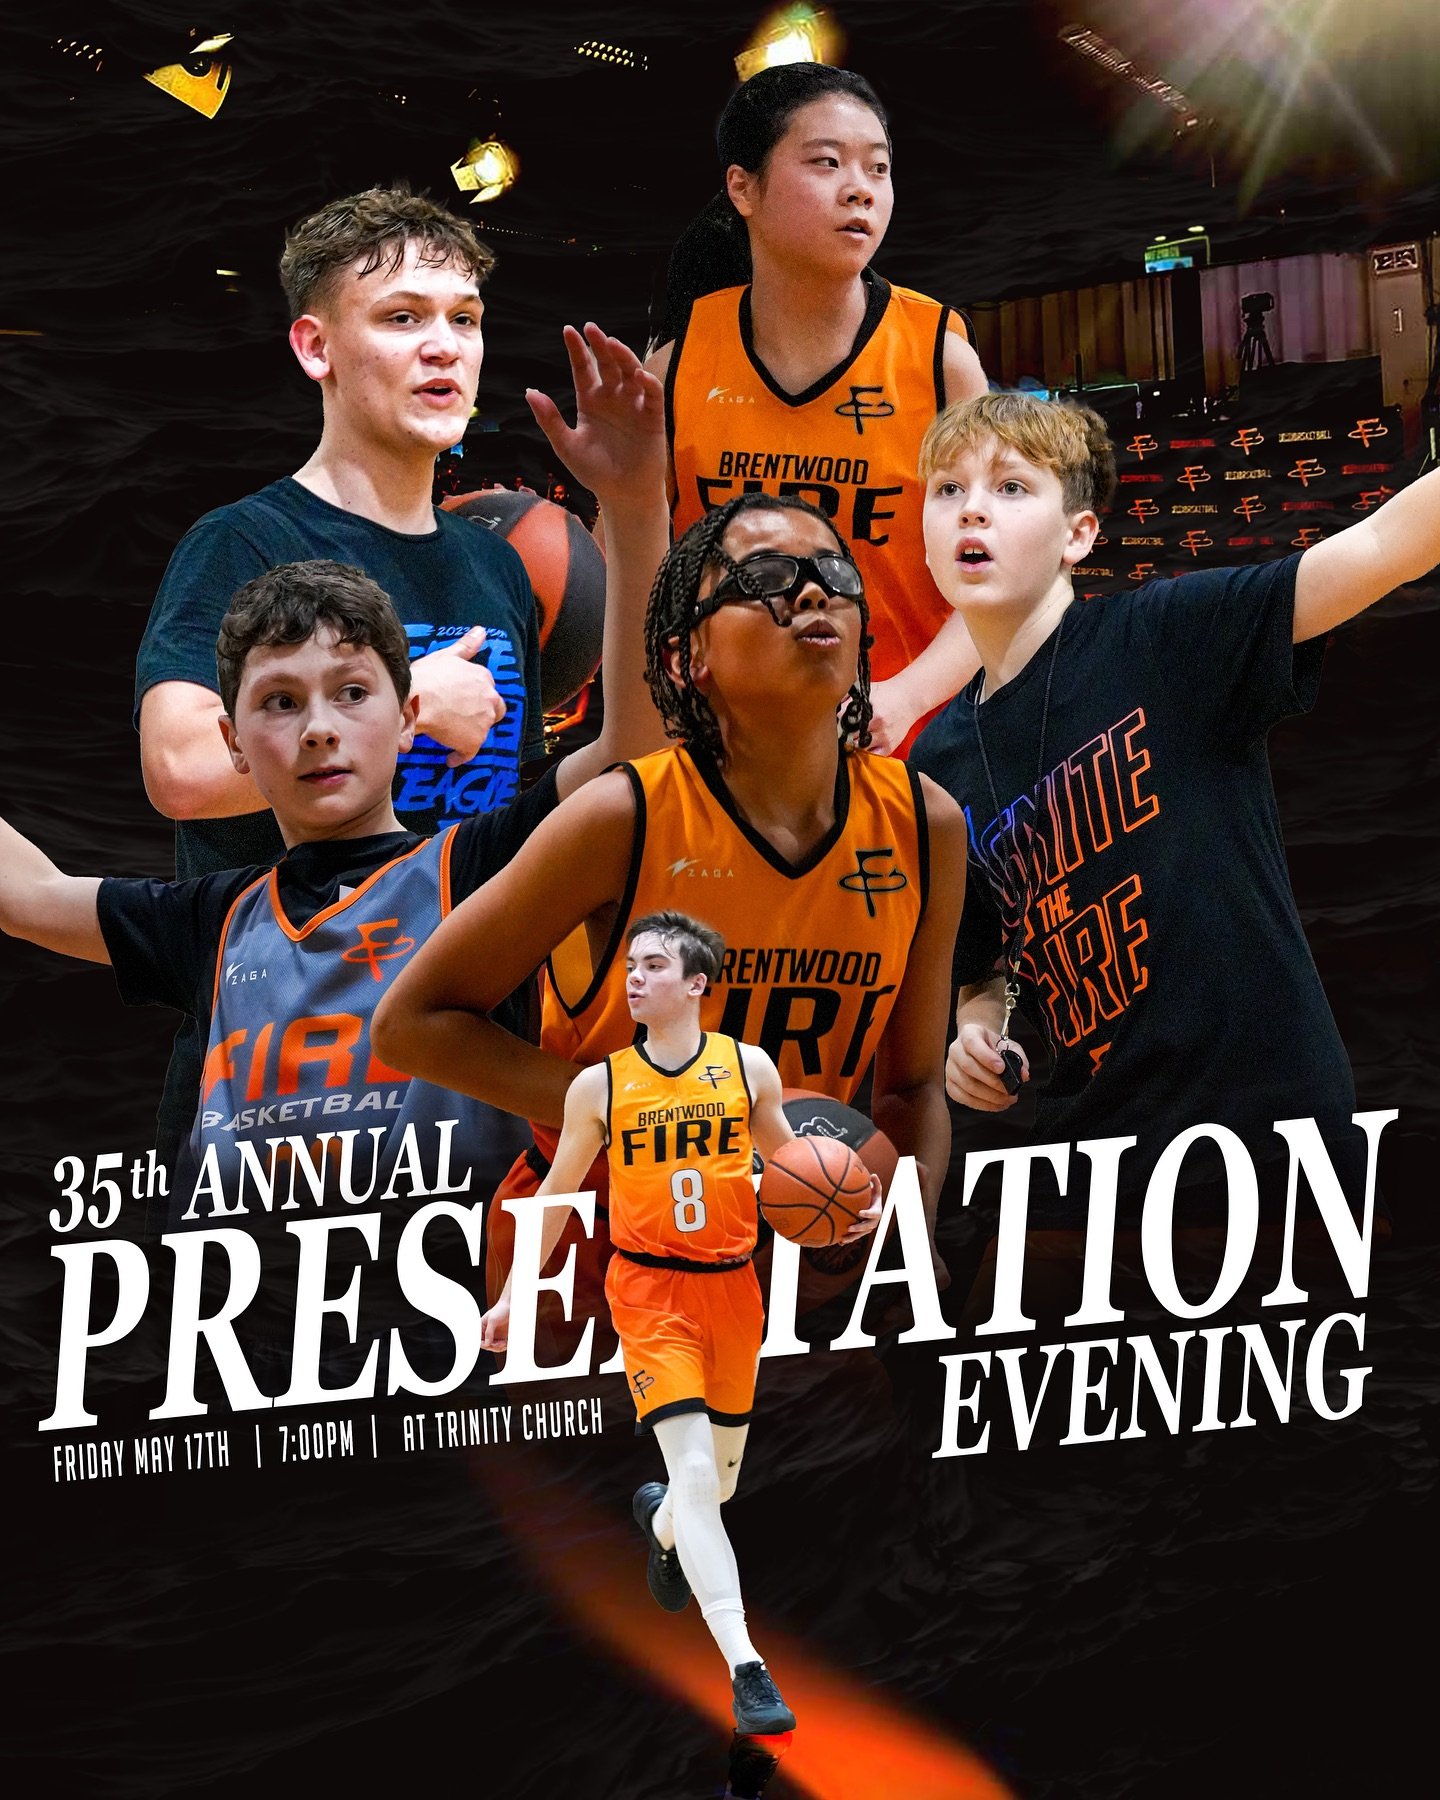 We invite you to Celebrate our 35th Annual Presentation Evening with us on Friday May 17th. 

Please sign up by May 1st to secure your member award.

📌 Link in bio